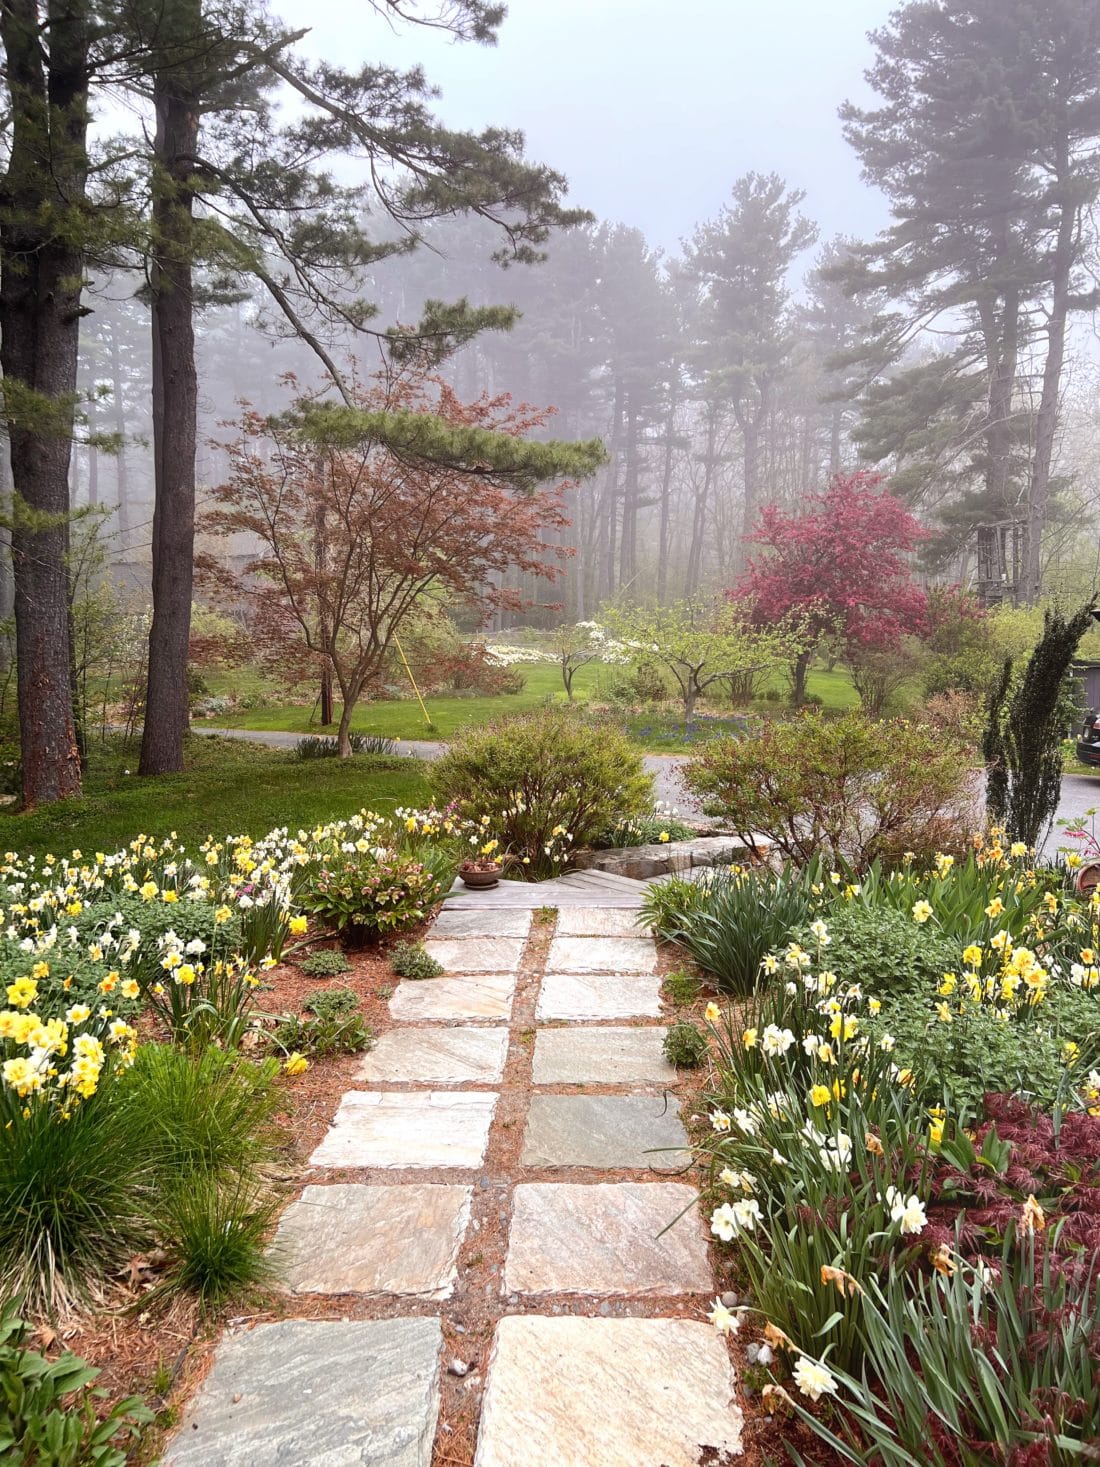 How to evolve your garden's flower bed design